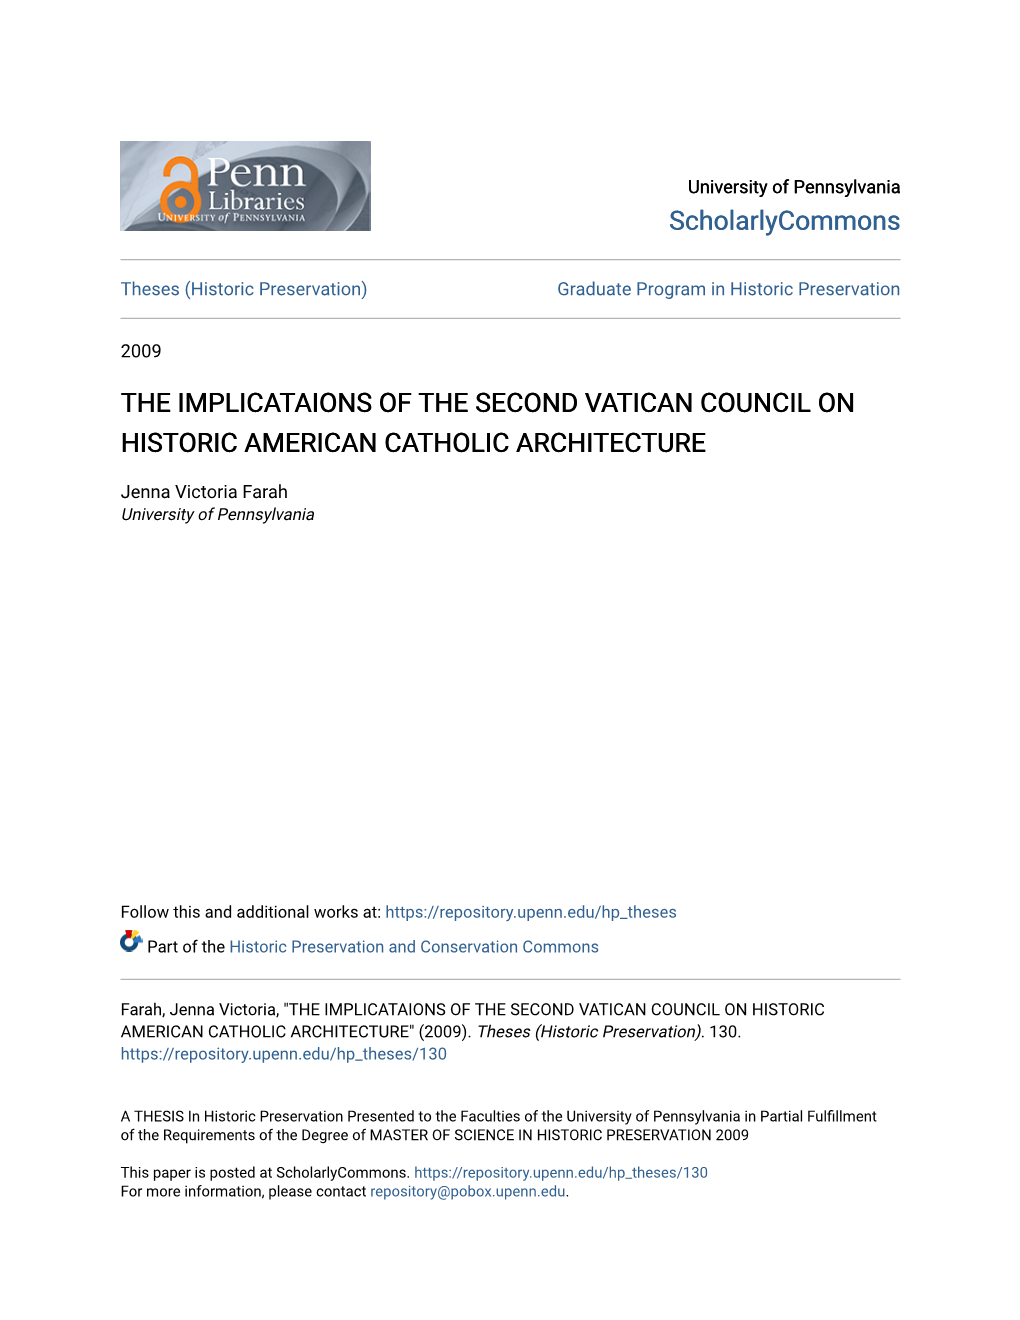 The Implicataions of the Second Vatican Council on Historic American Catholic Architecture